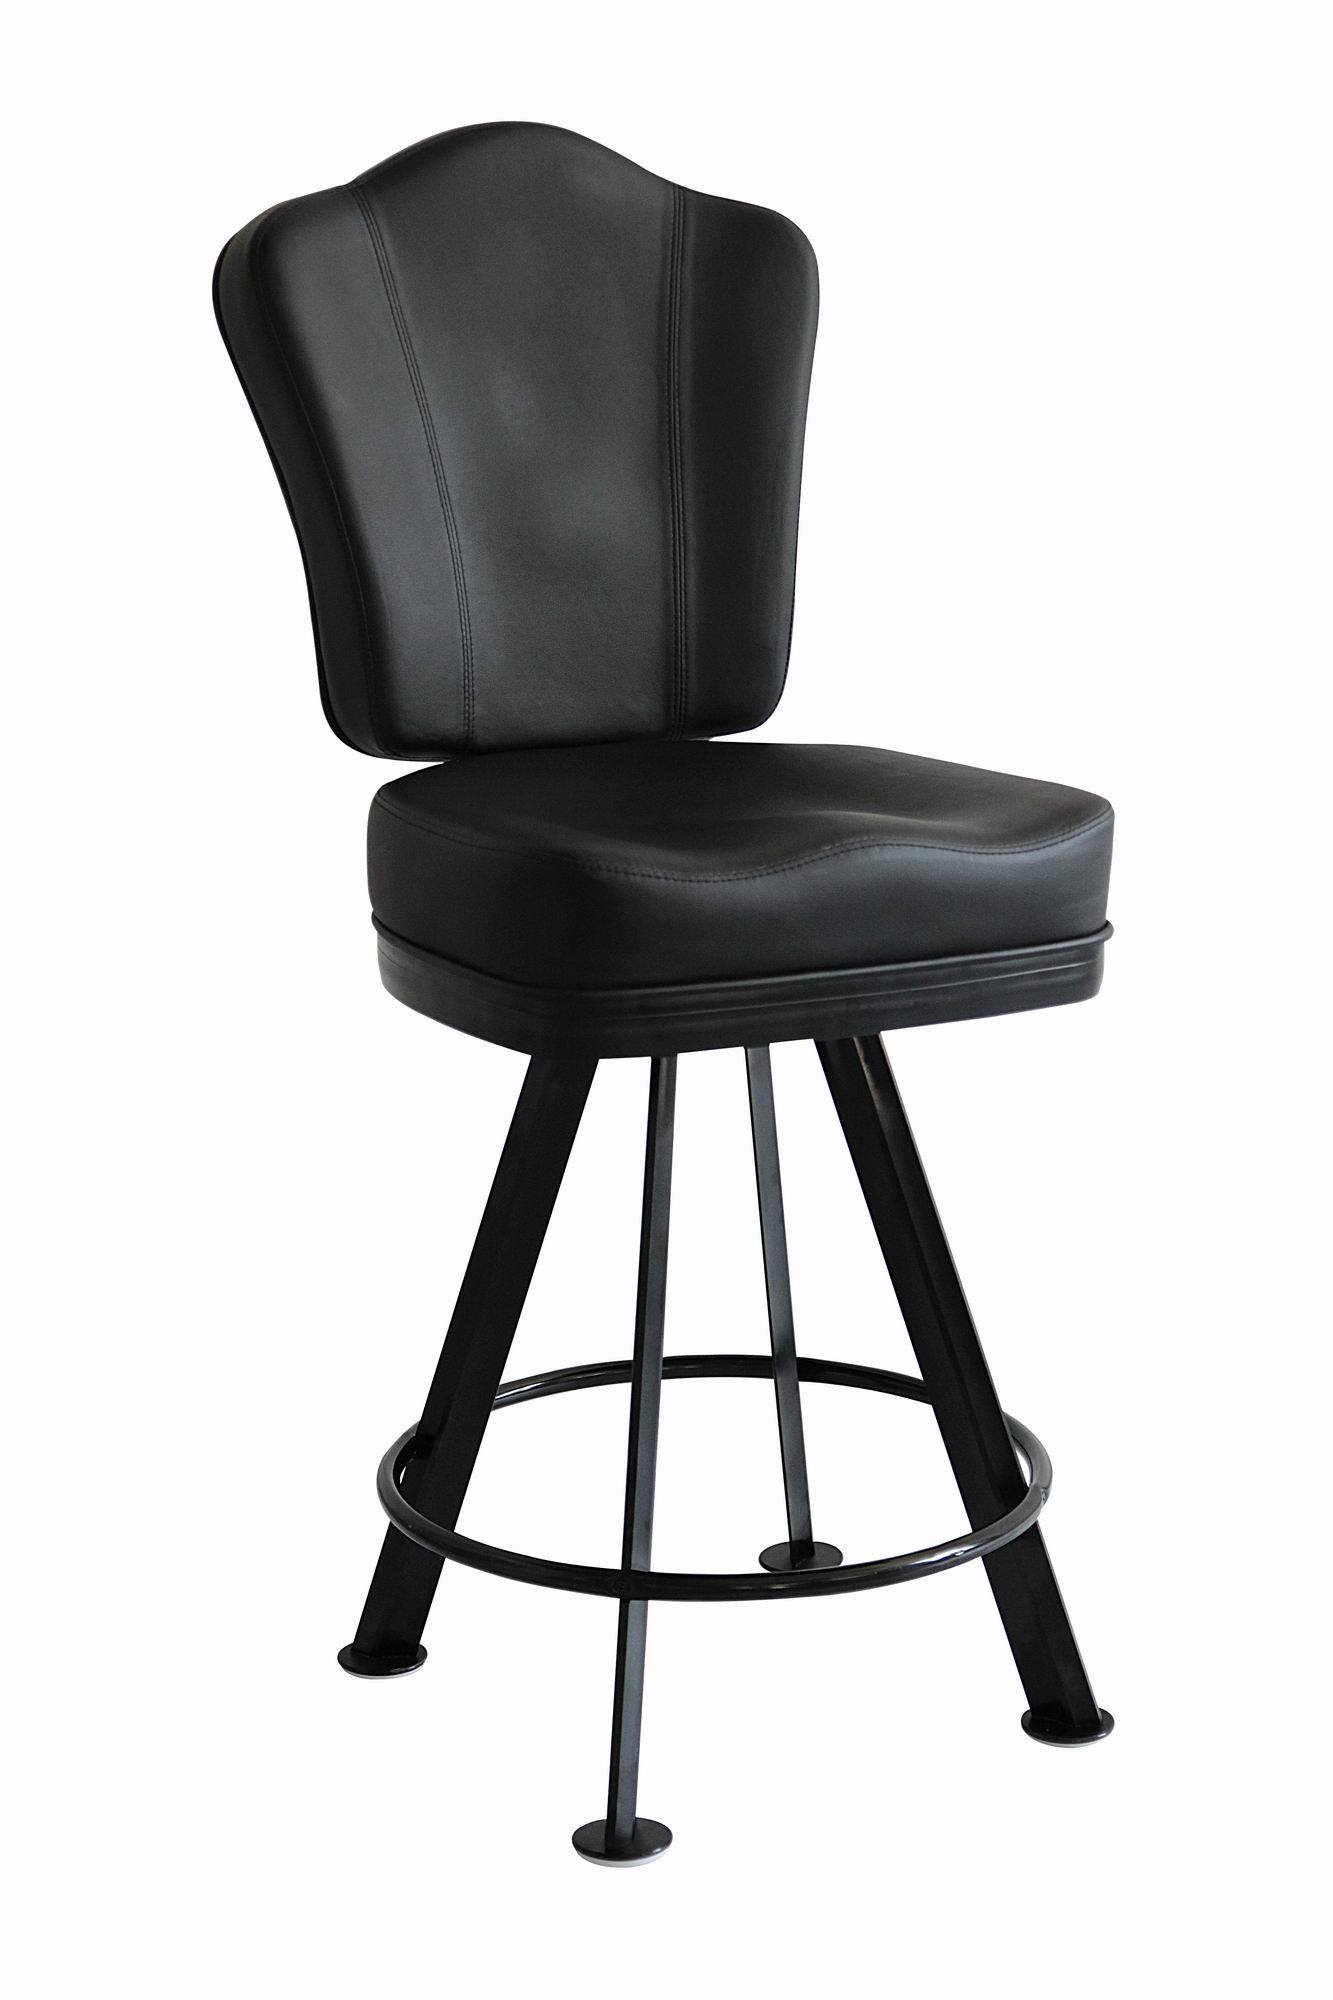 Modern Faux Leather Poker Gamble Casino Chair with Back (FS-G8010D2)